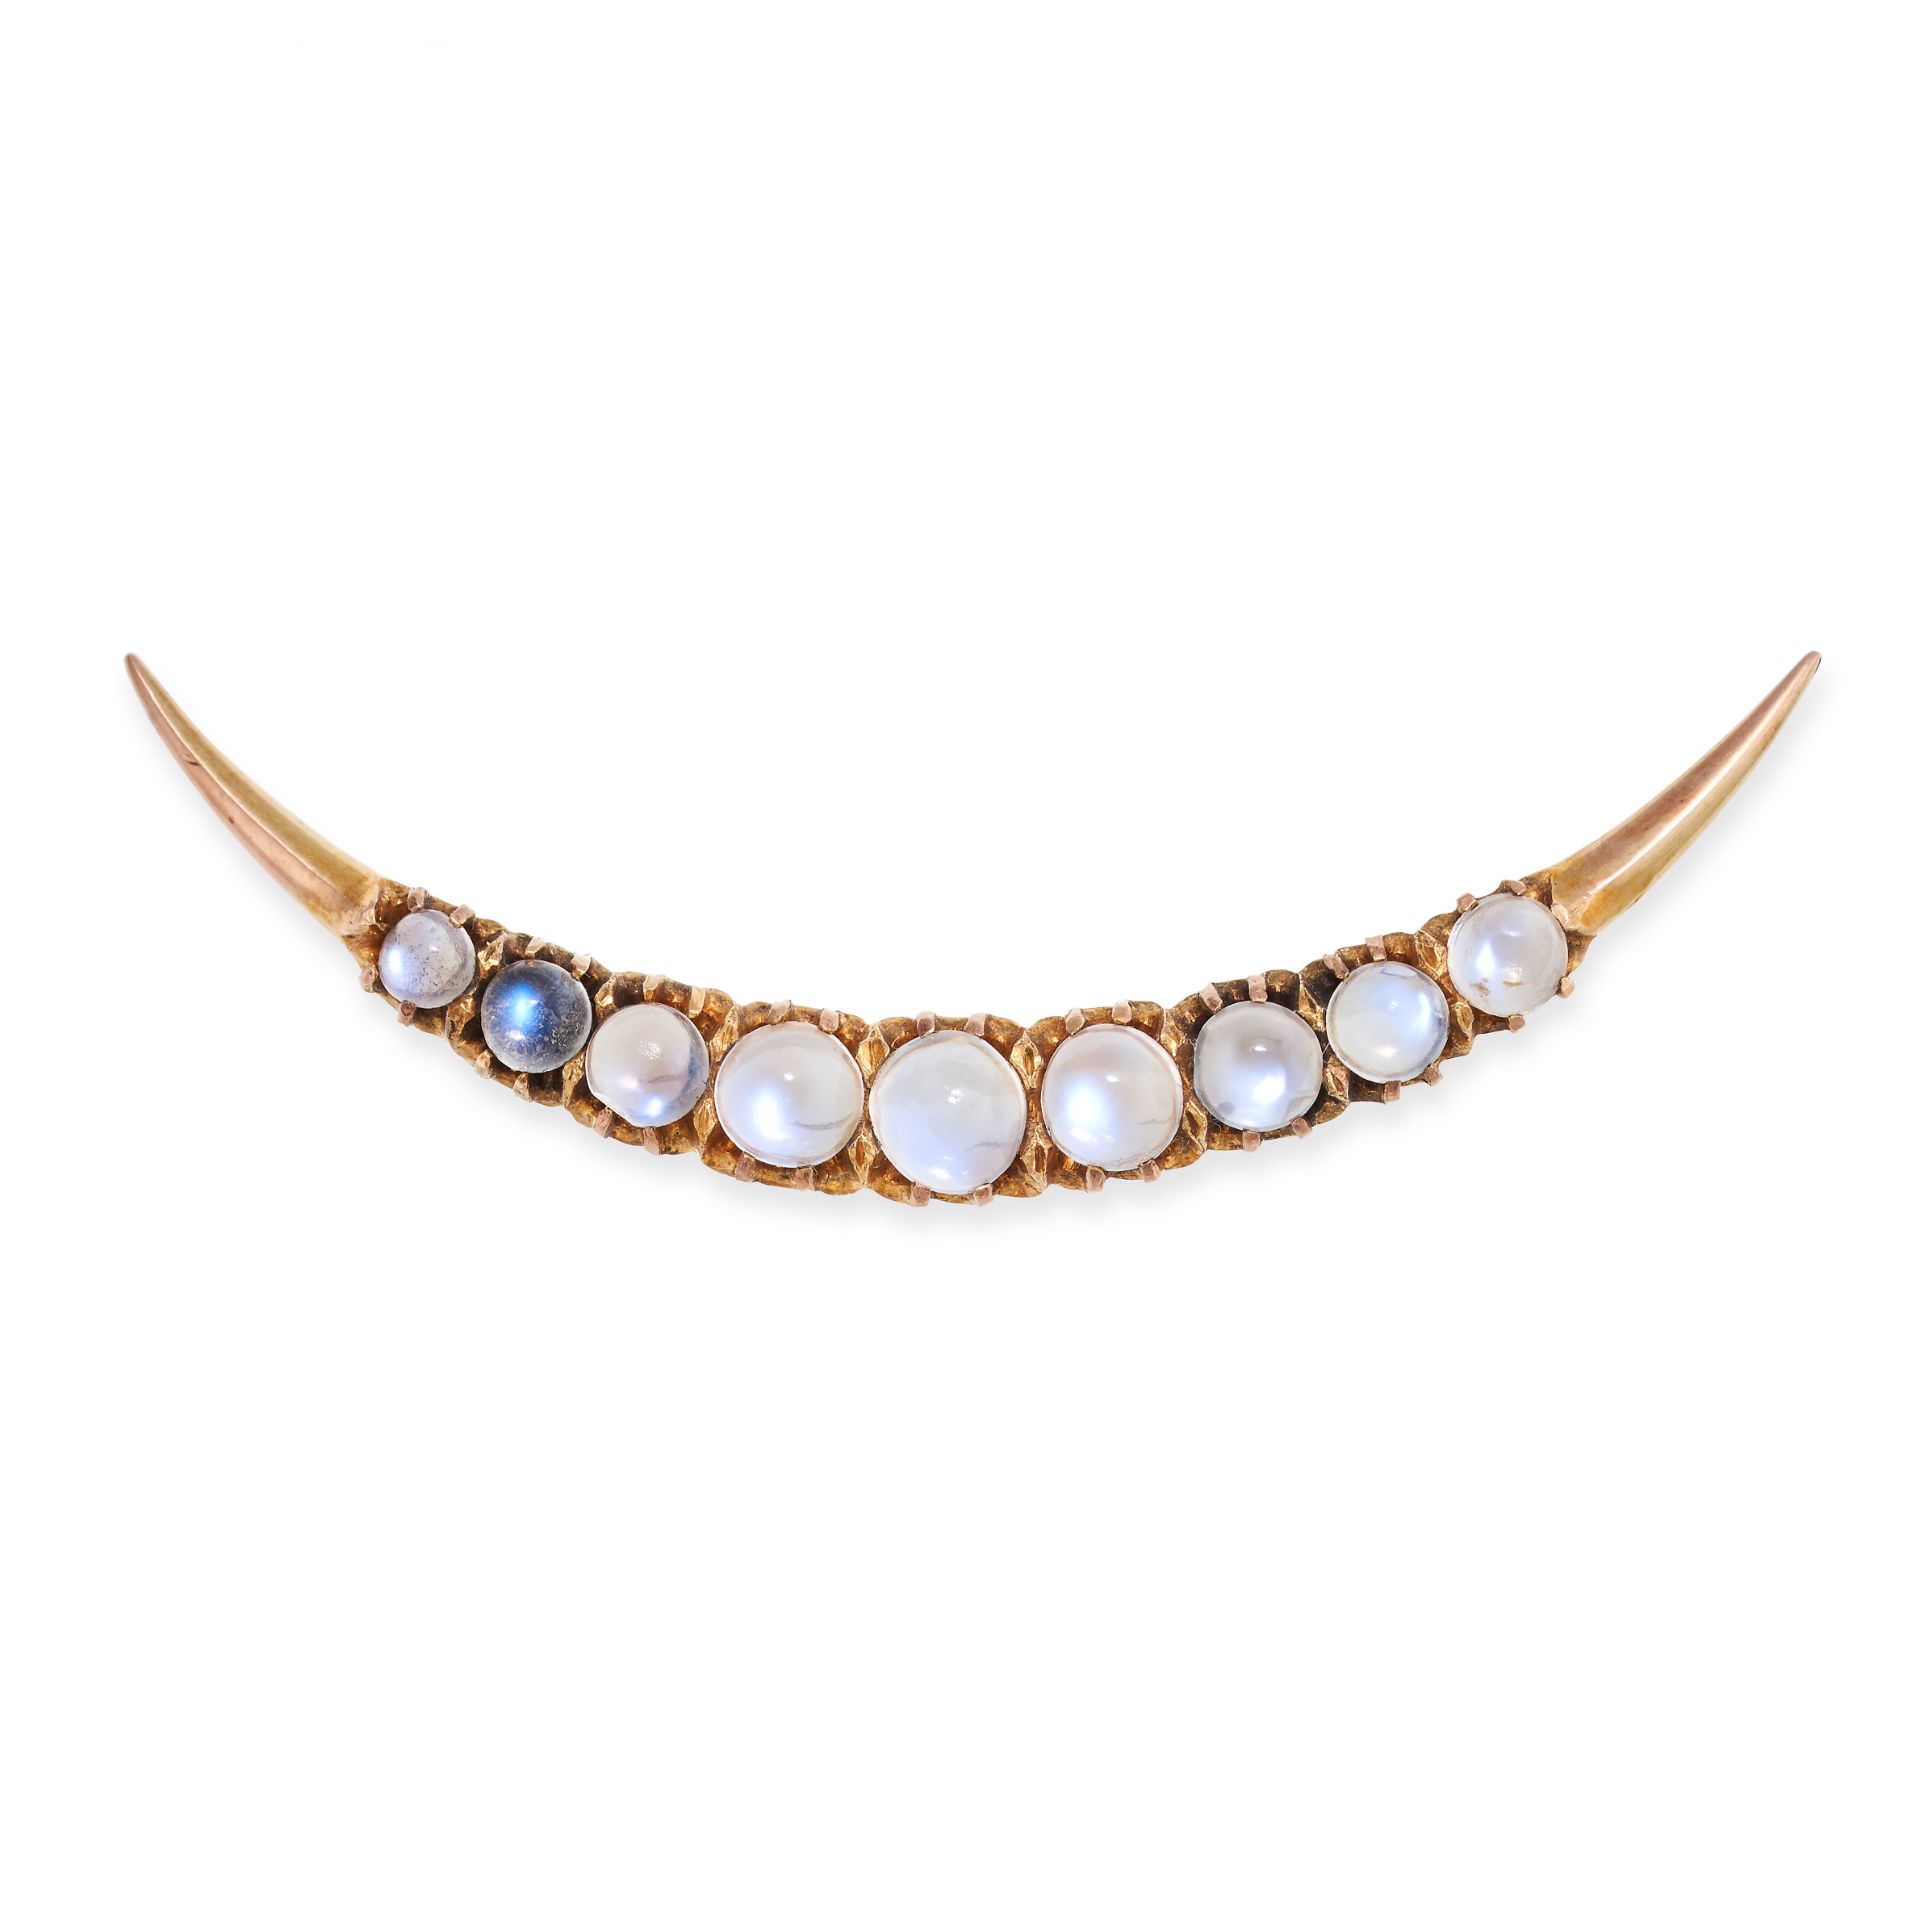 NO RESERVE - AN ANTIQUE MOONSTONE CRESCENT MOON BROOCH in yellow gold, designed as a crescent moo...